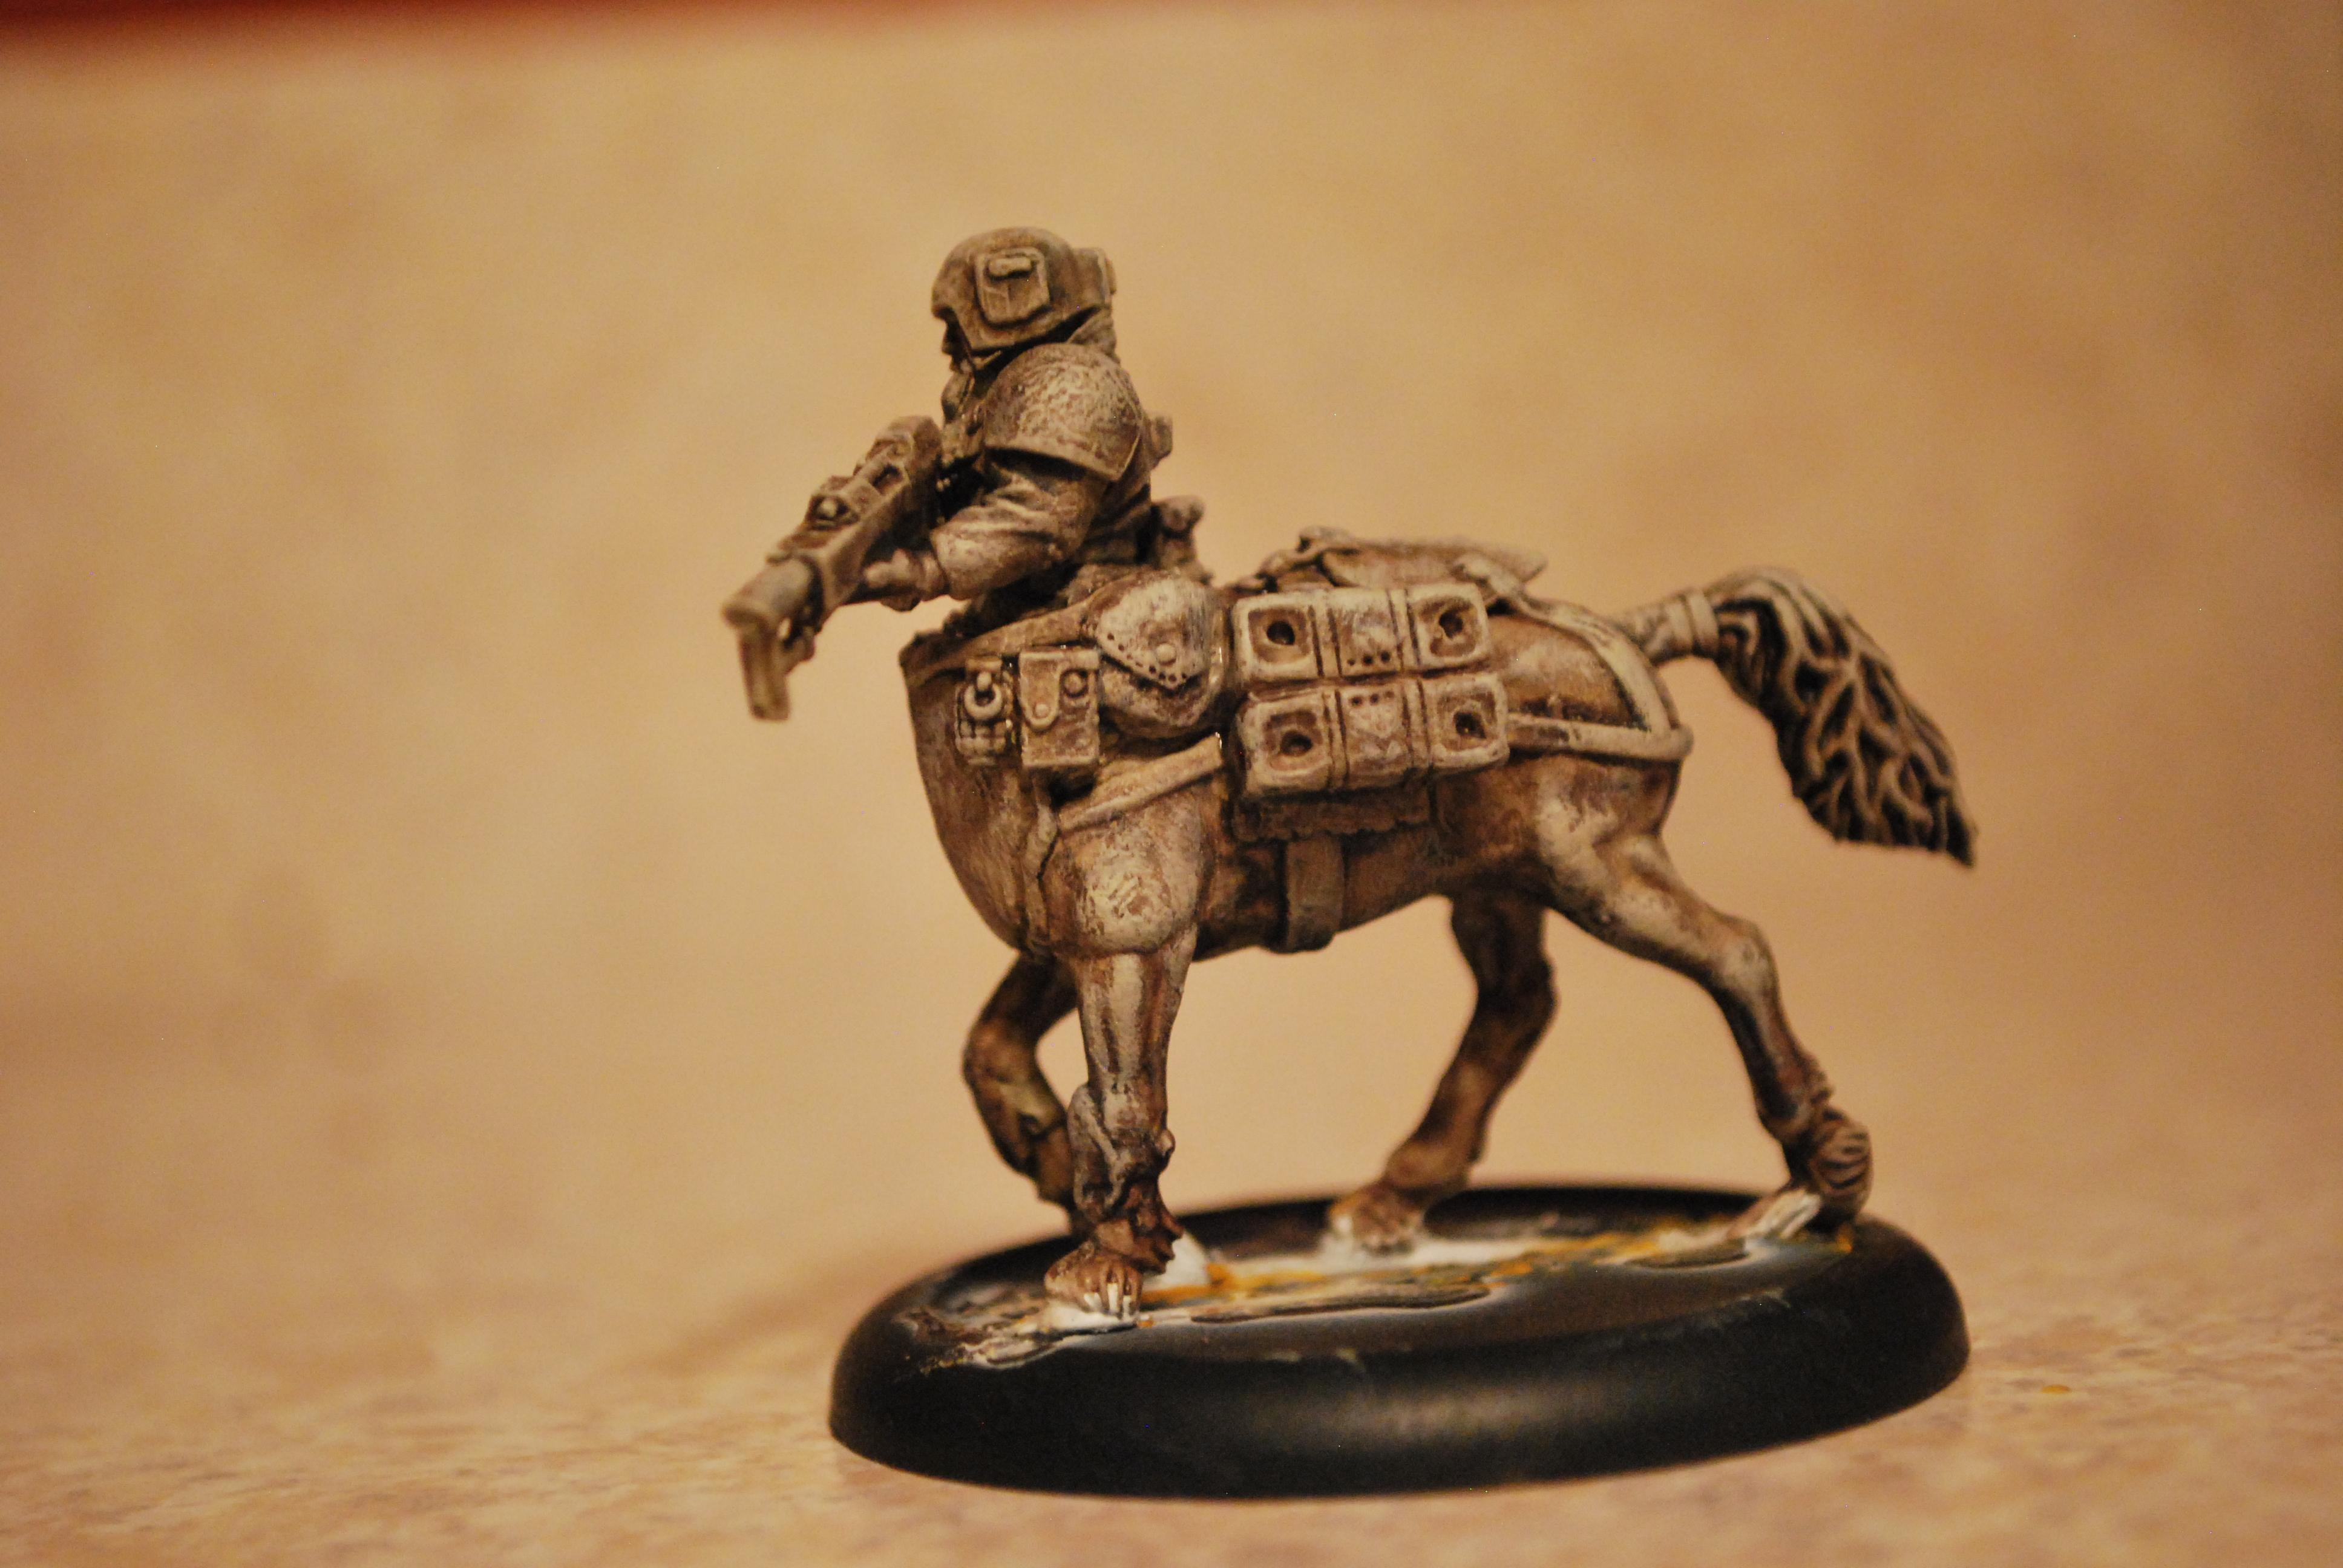 Centaur, Conversion, Custo, Fallout, High Elf Horse, Hybrid, Imperial Guard, Minis, Mutant, Post Apoc, Post Apocalyptic, Pro-create, Prototype, Sculpting, This Is Not A Test